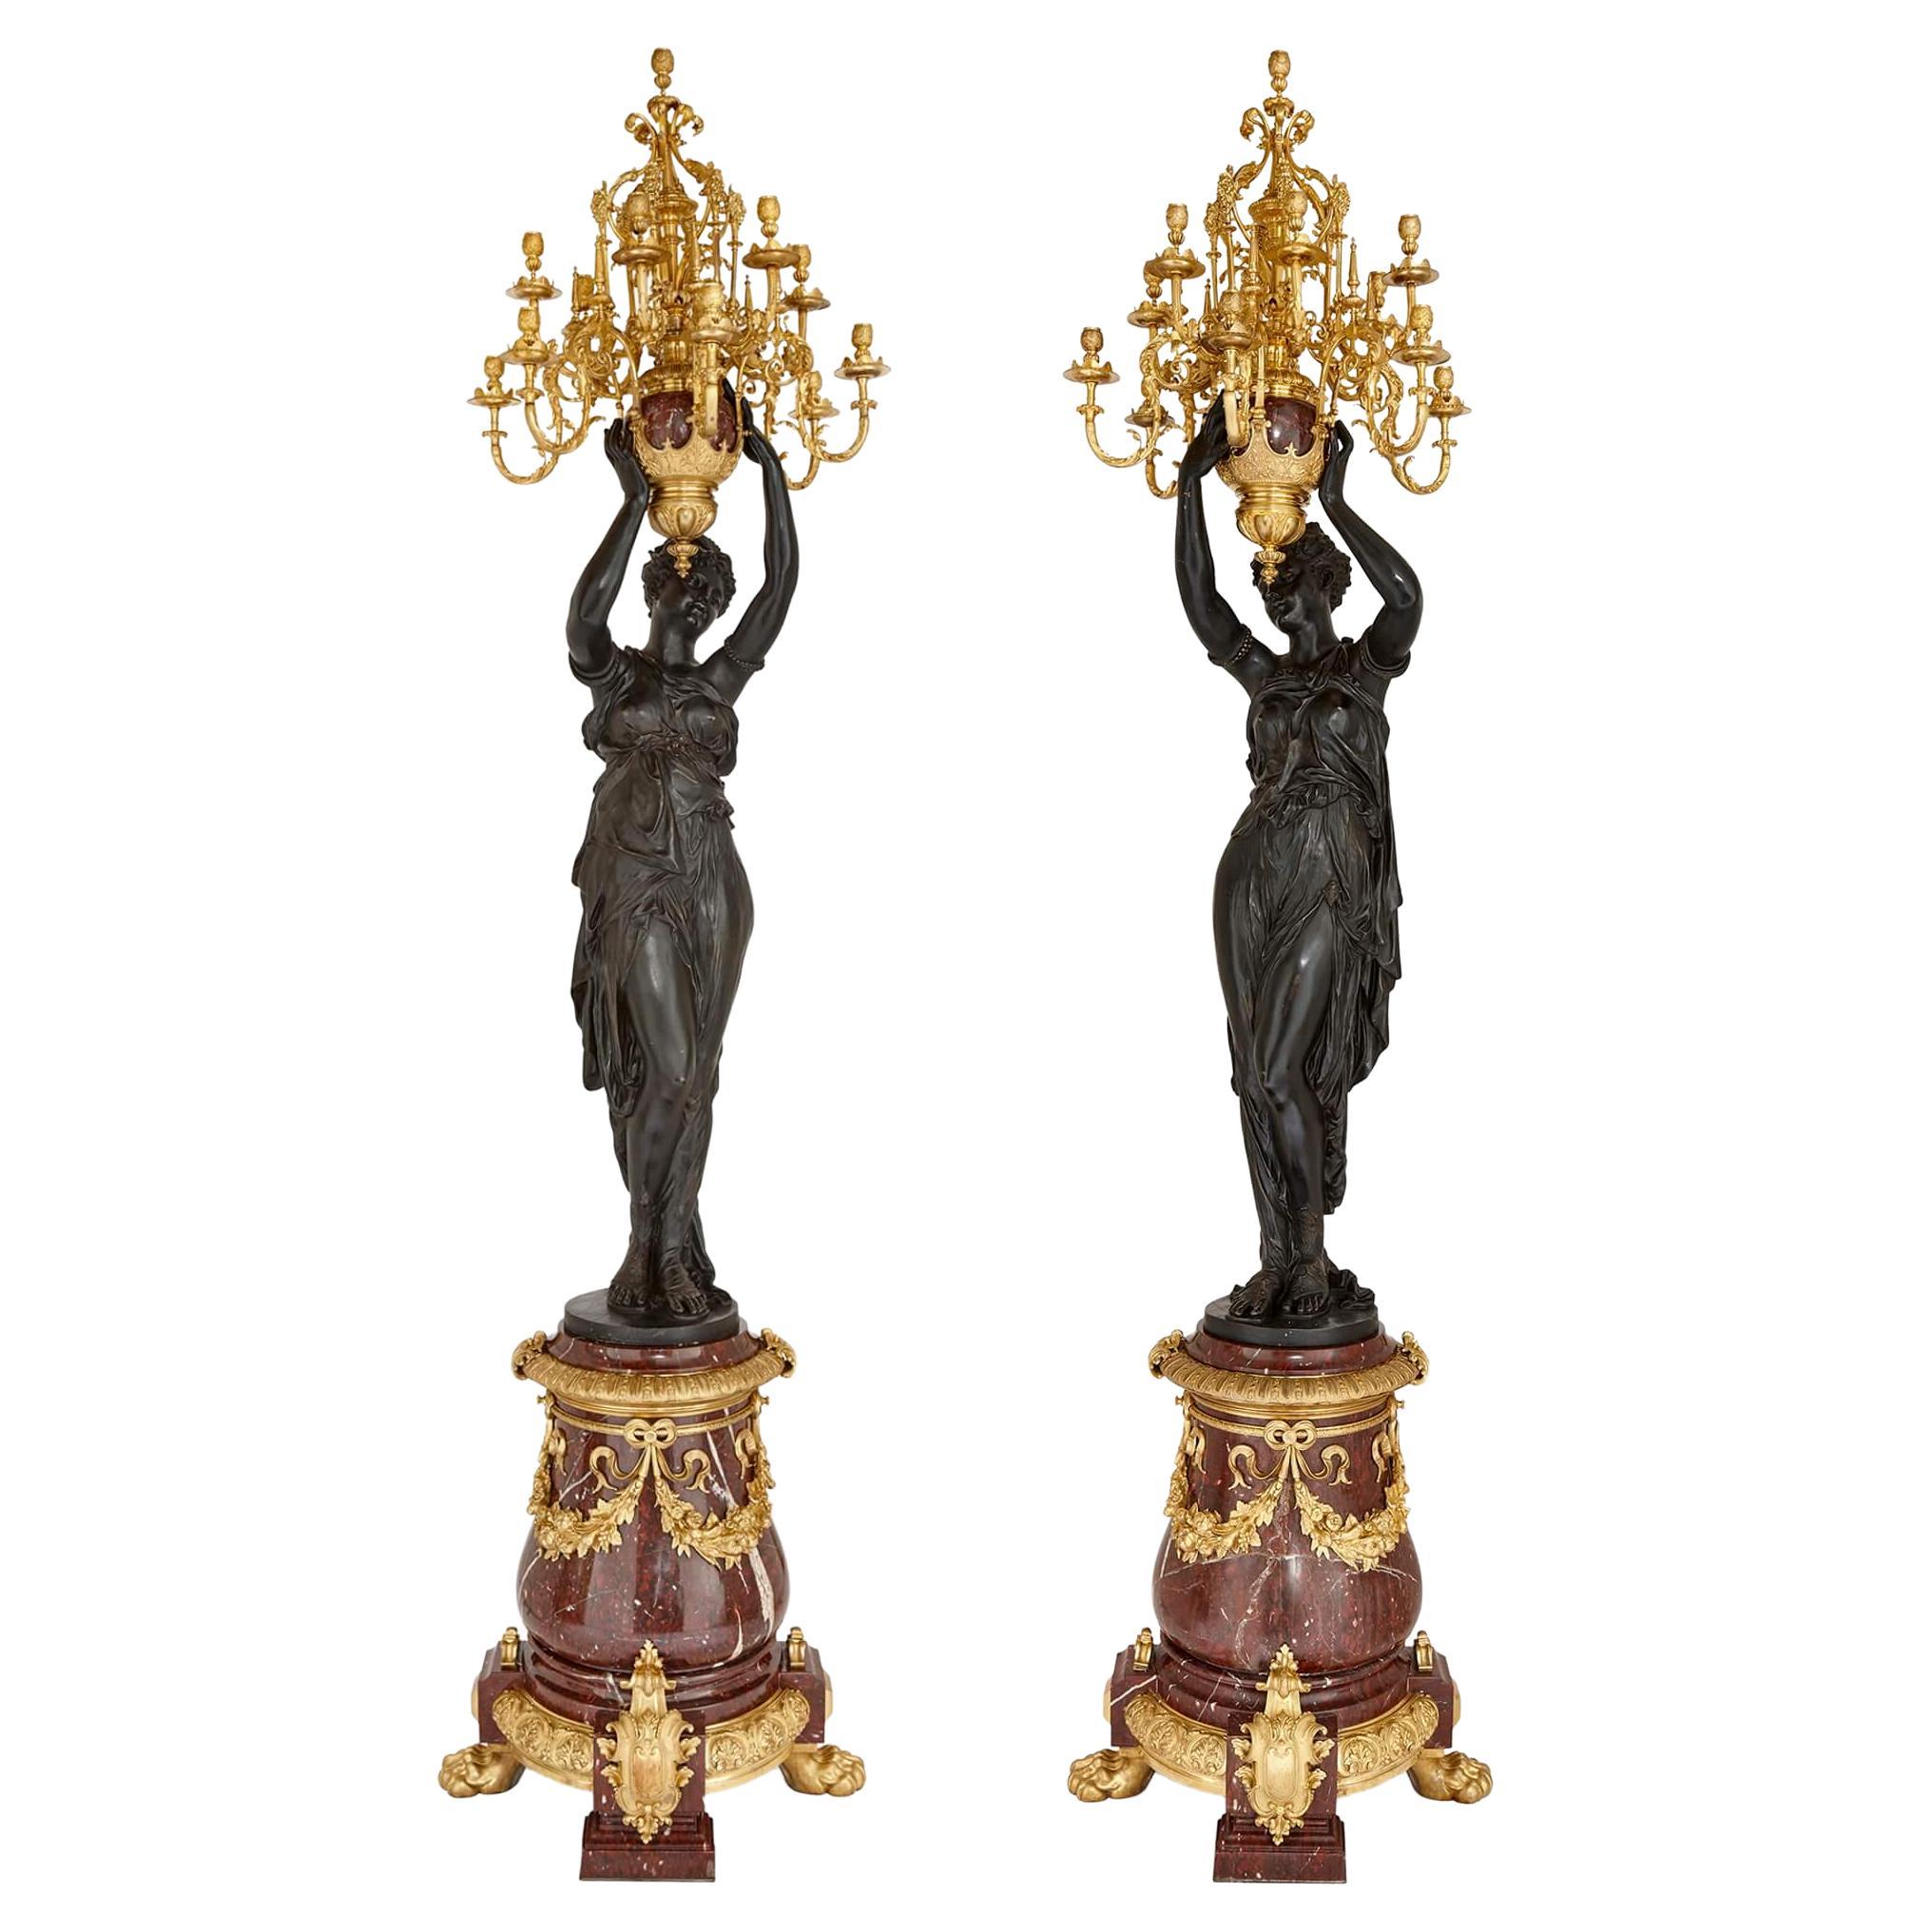 Pair of Very Large French Patinated and Gilt Bronze Candelabra